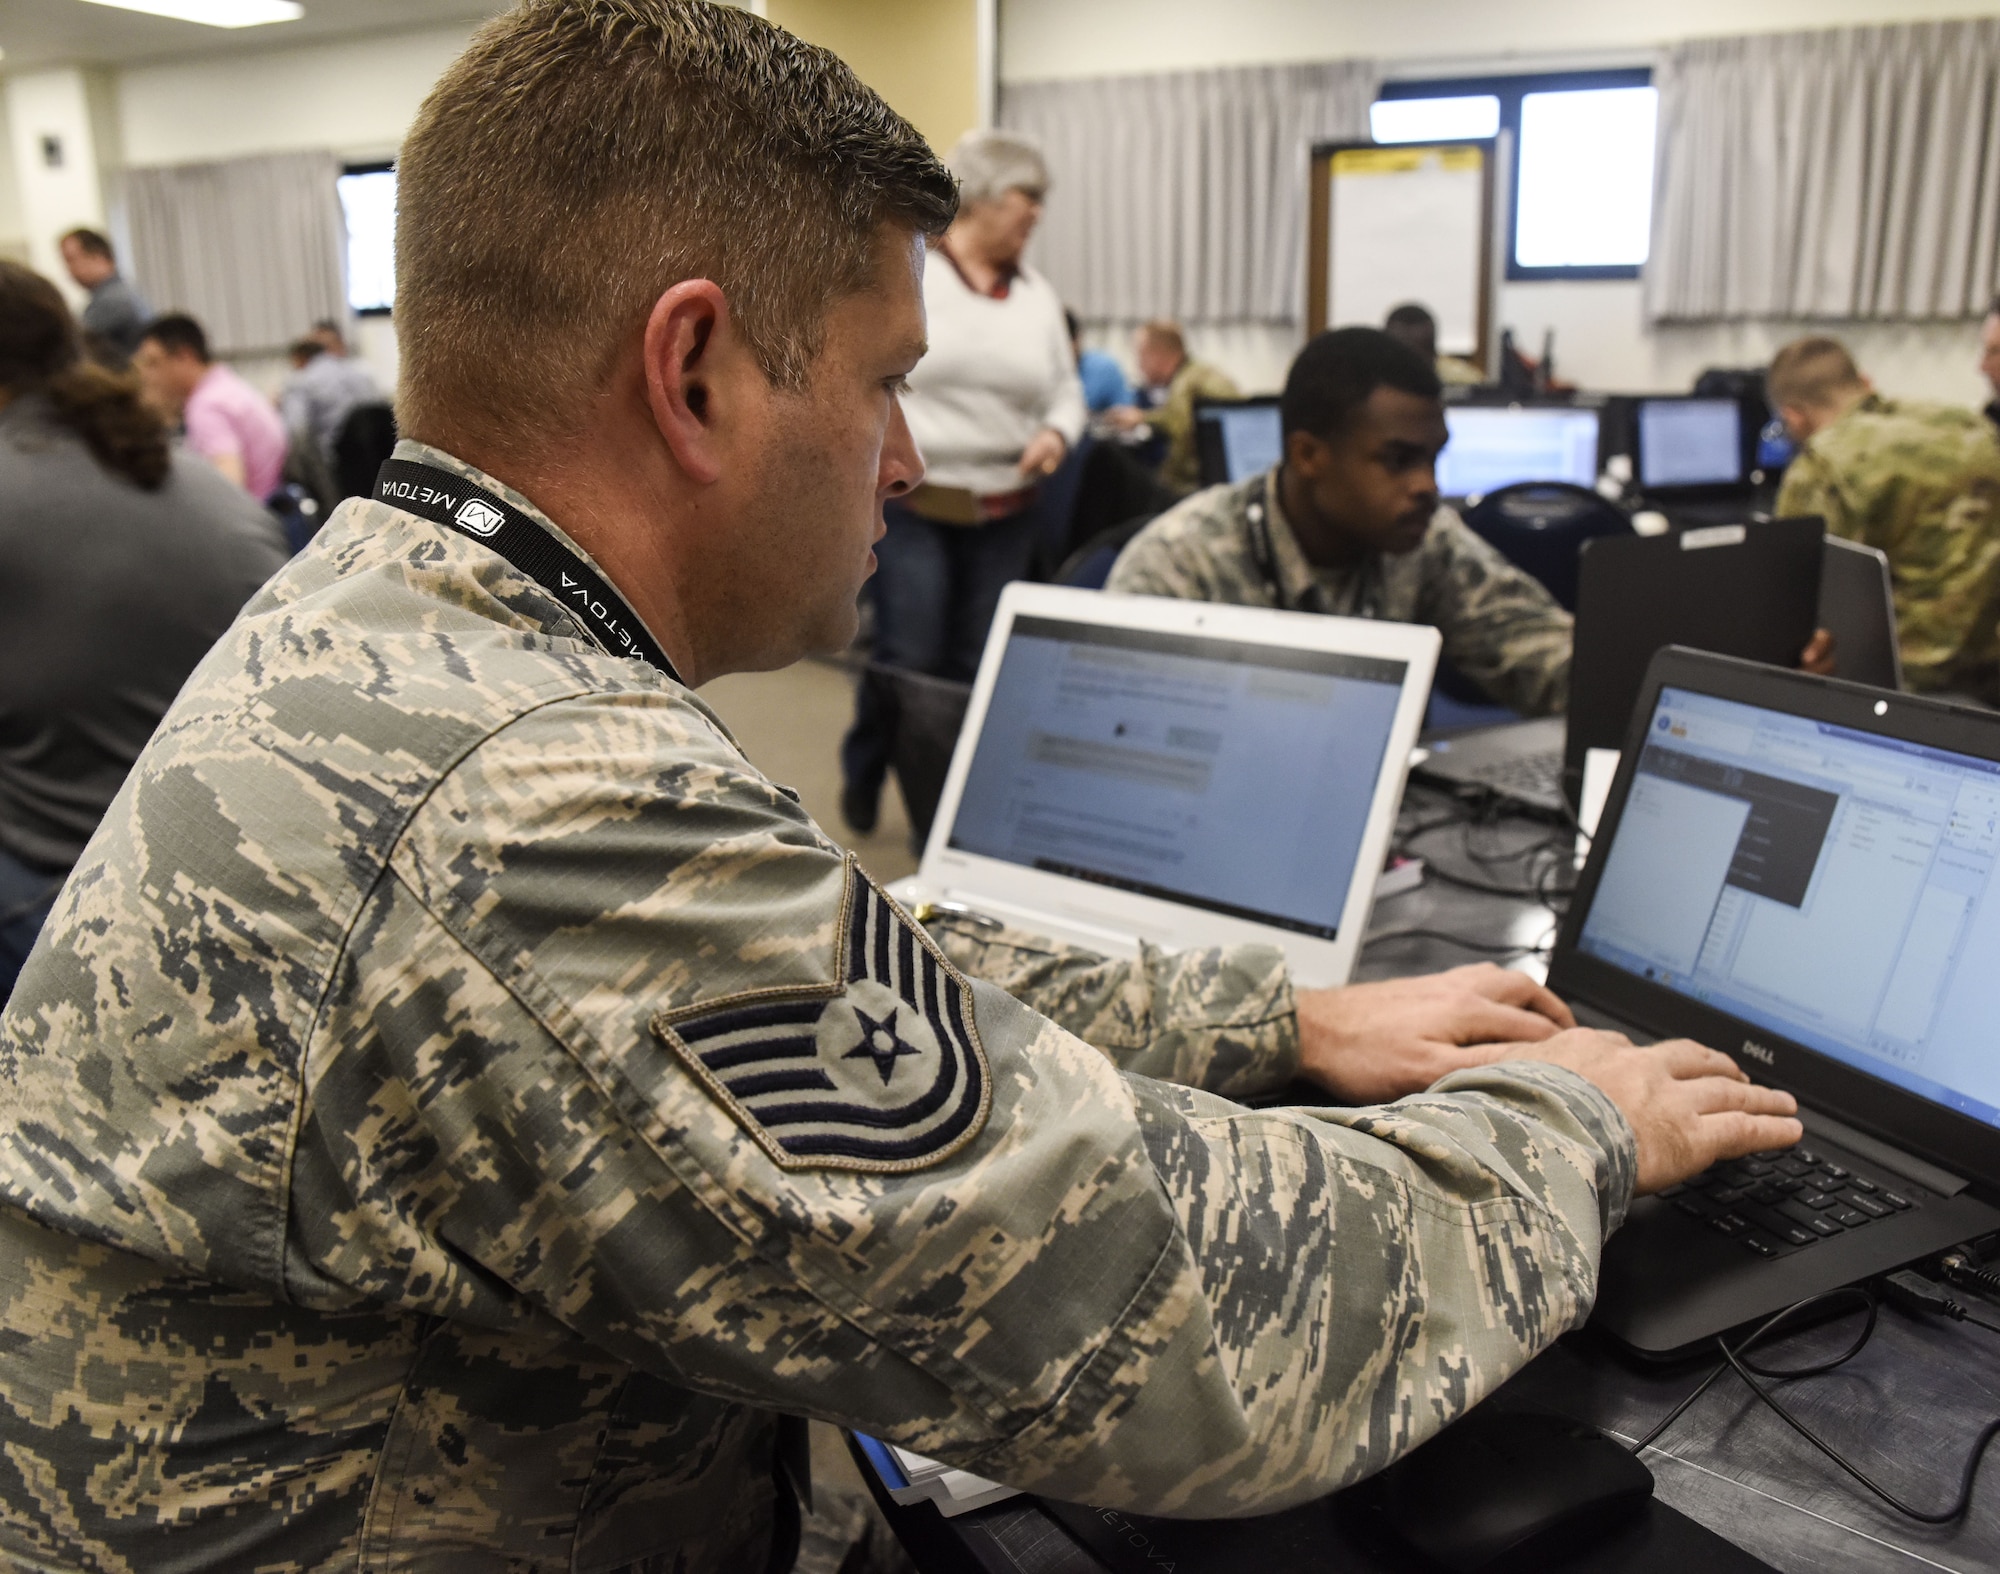 The three-day training course gave participants the opportunity to work within a simulated environment created specifically to assist cyber operators and IT managers with mitigating the risks of a cyber attack. (U.S. Air National Guard photo by Senior Airman Kayla K. Edwards)